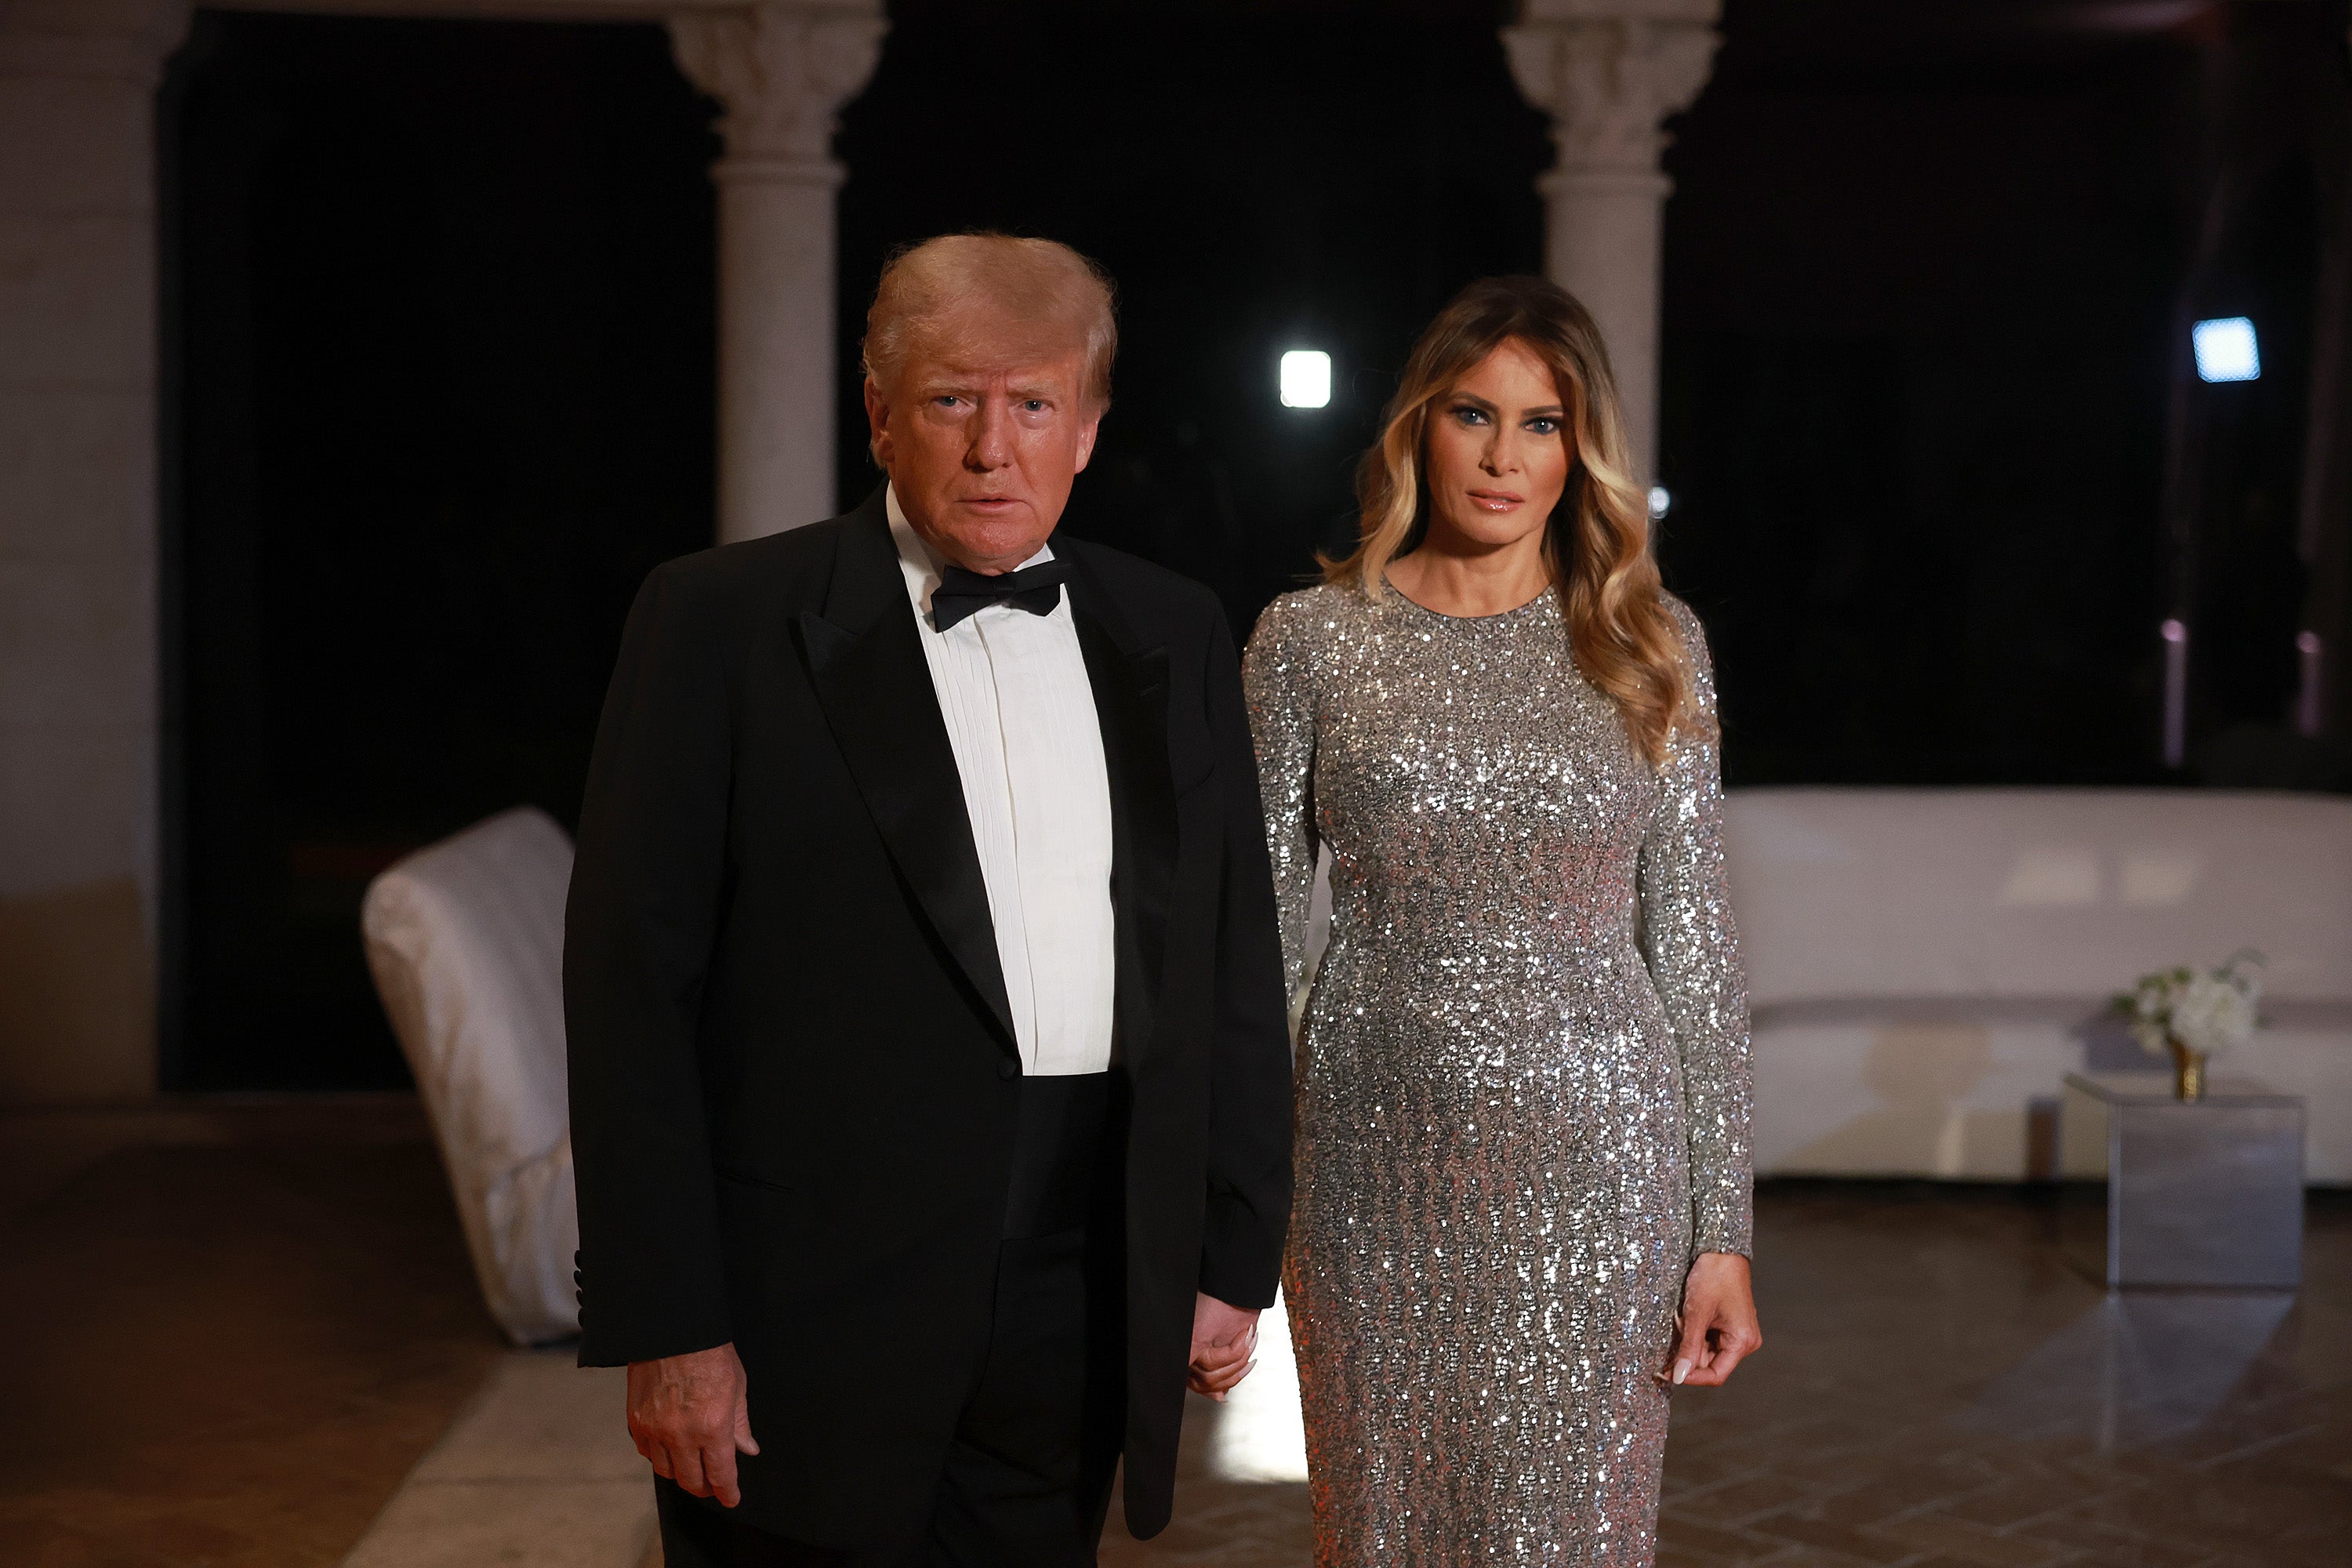 The Trumps celebrating New Year’s Eve at their Palm Beach home on 31 December 2022